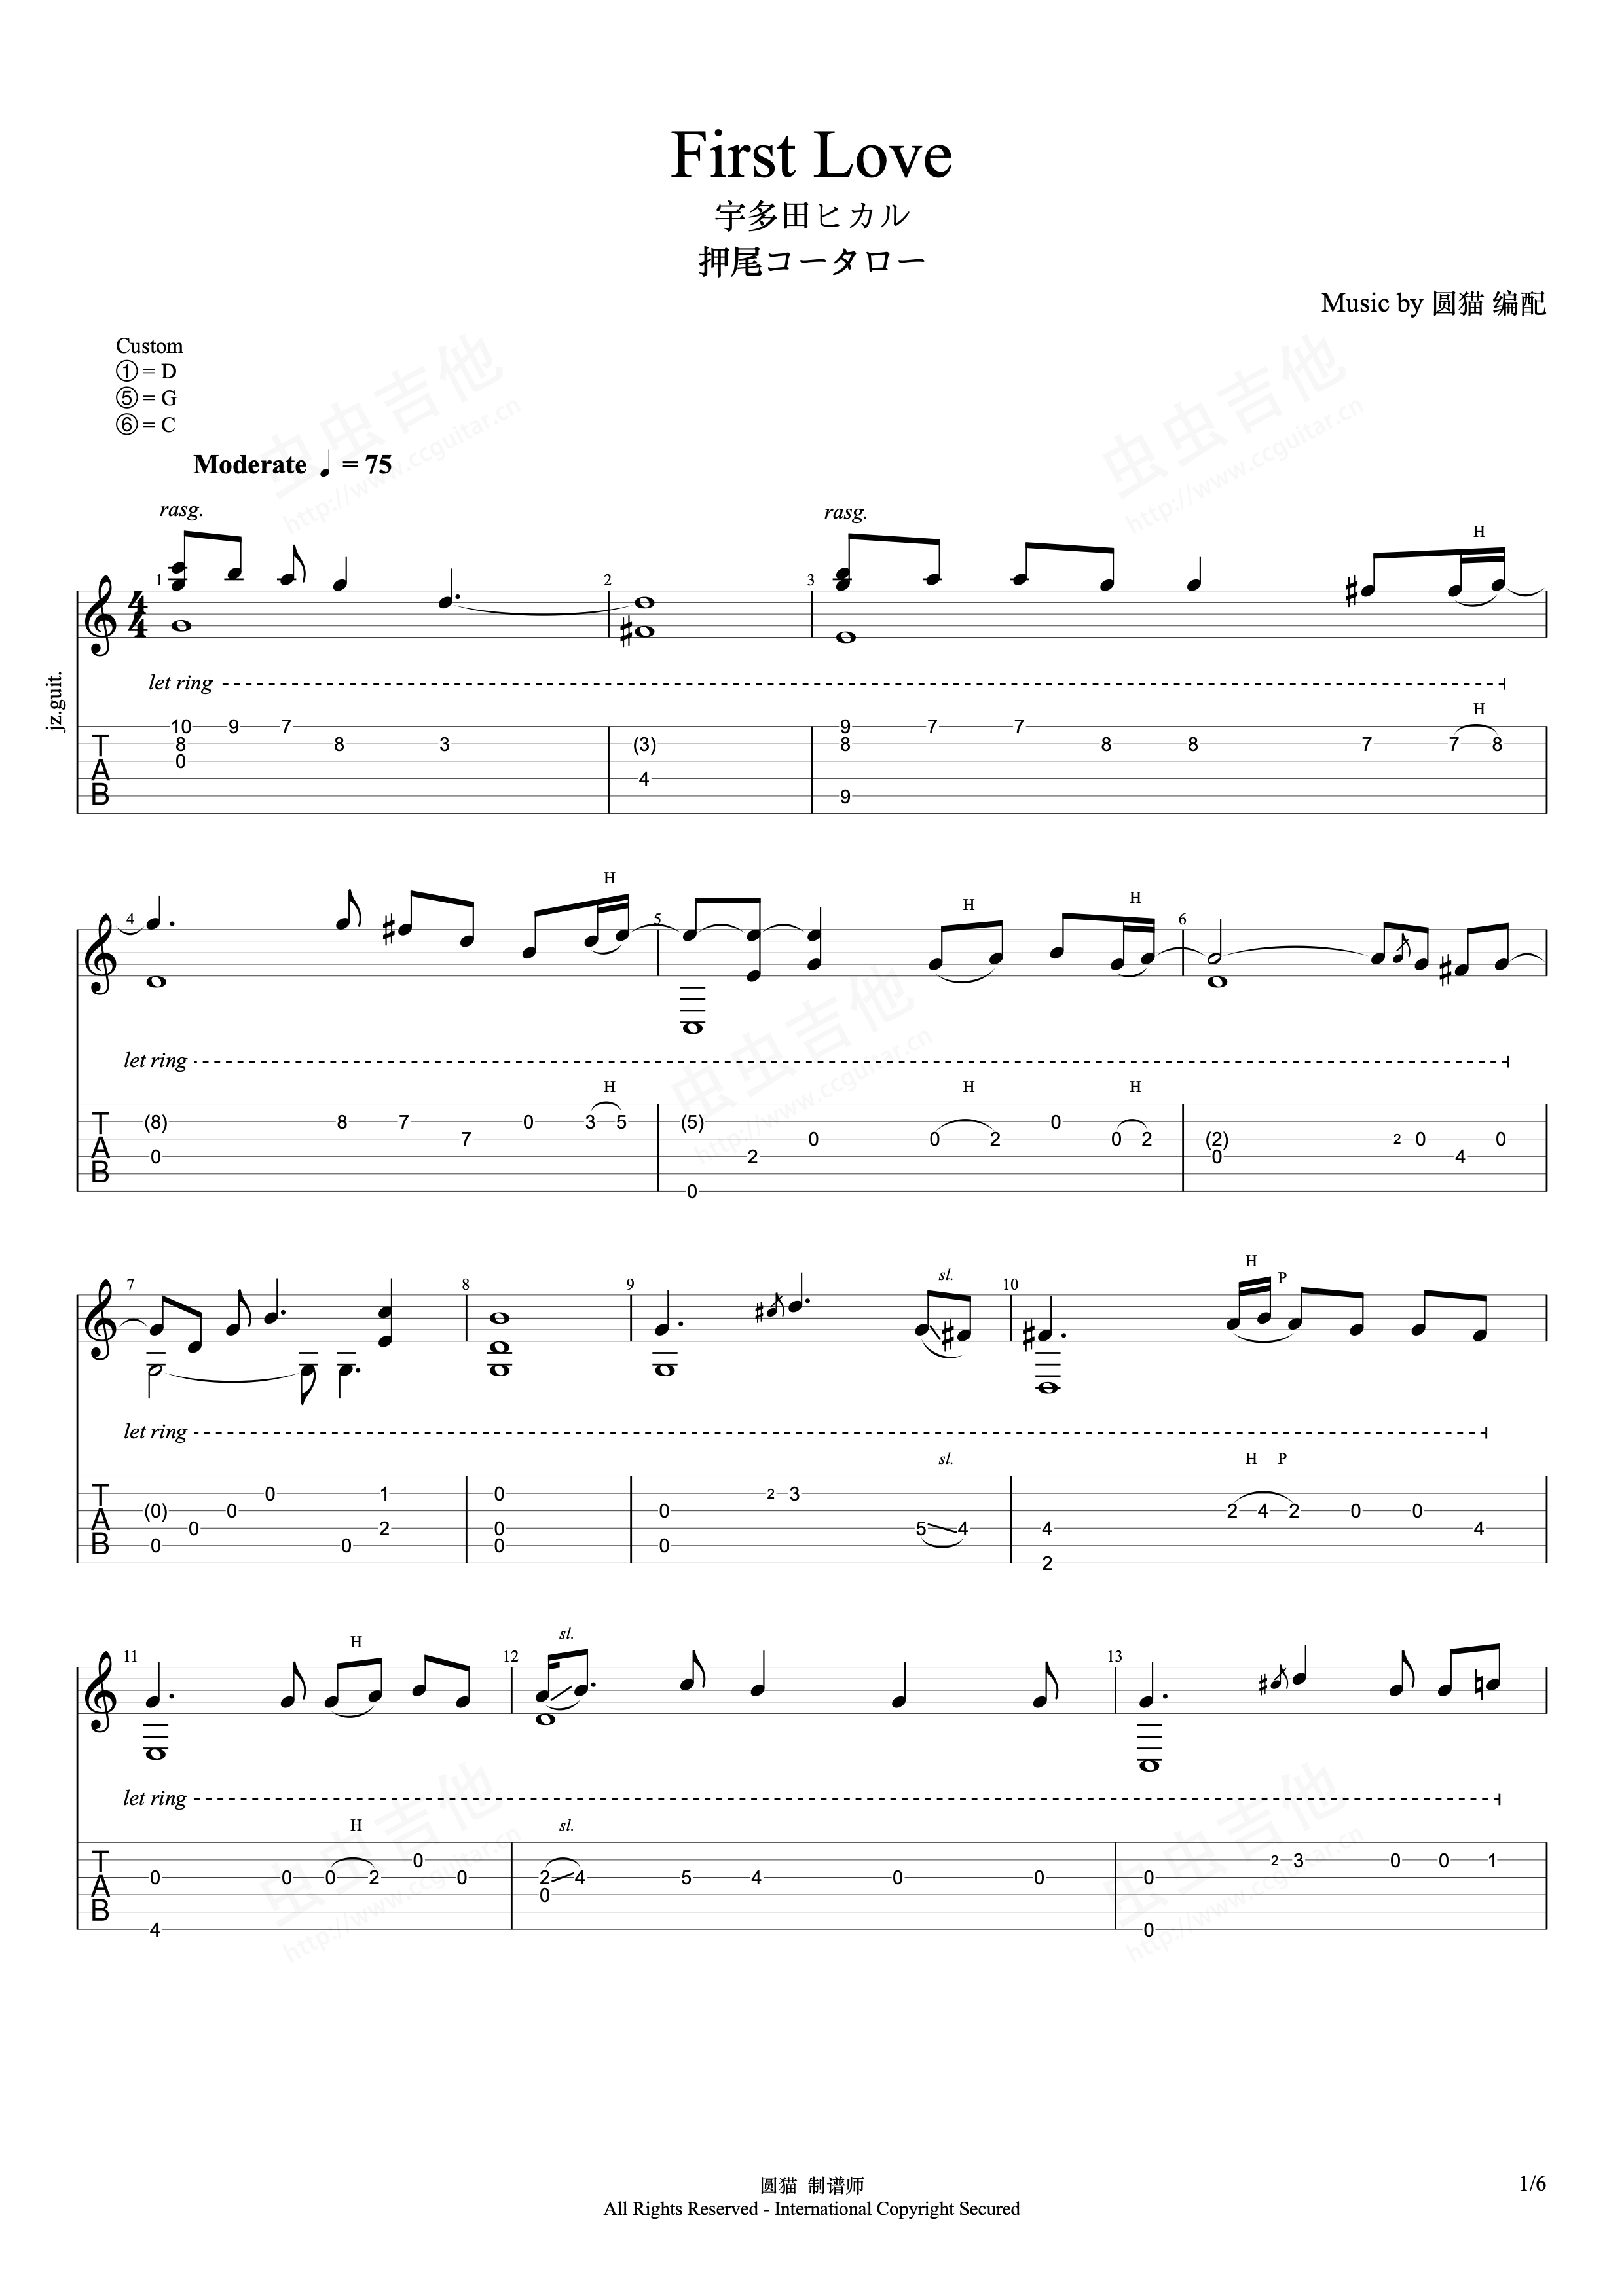 It's Only Love by The Beatles - Guitar Chords/Lyrics - Guitar Instructor